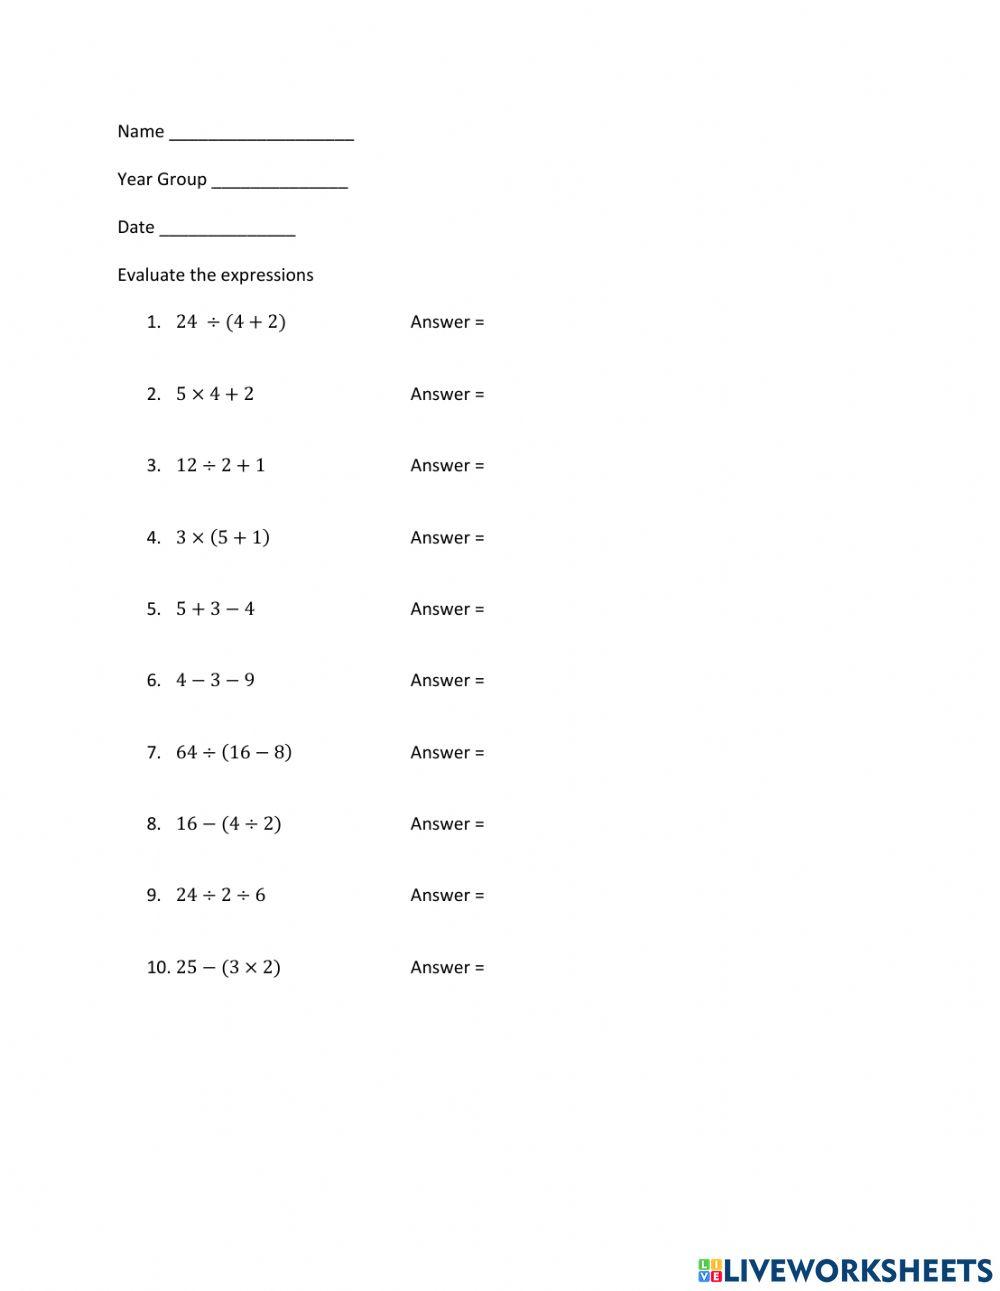 Order of Operations - Two Steps